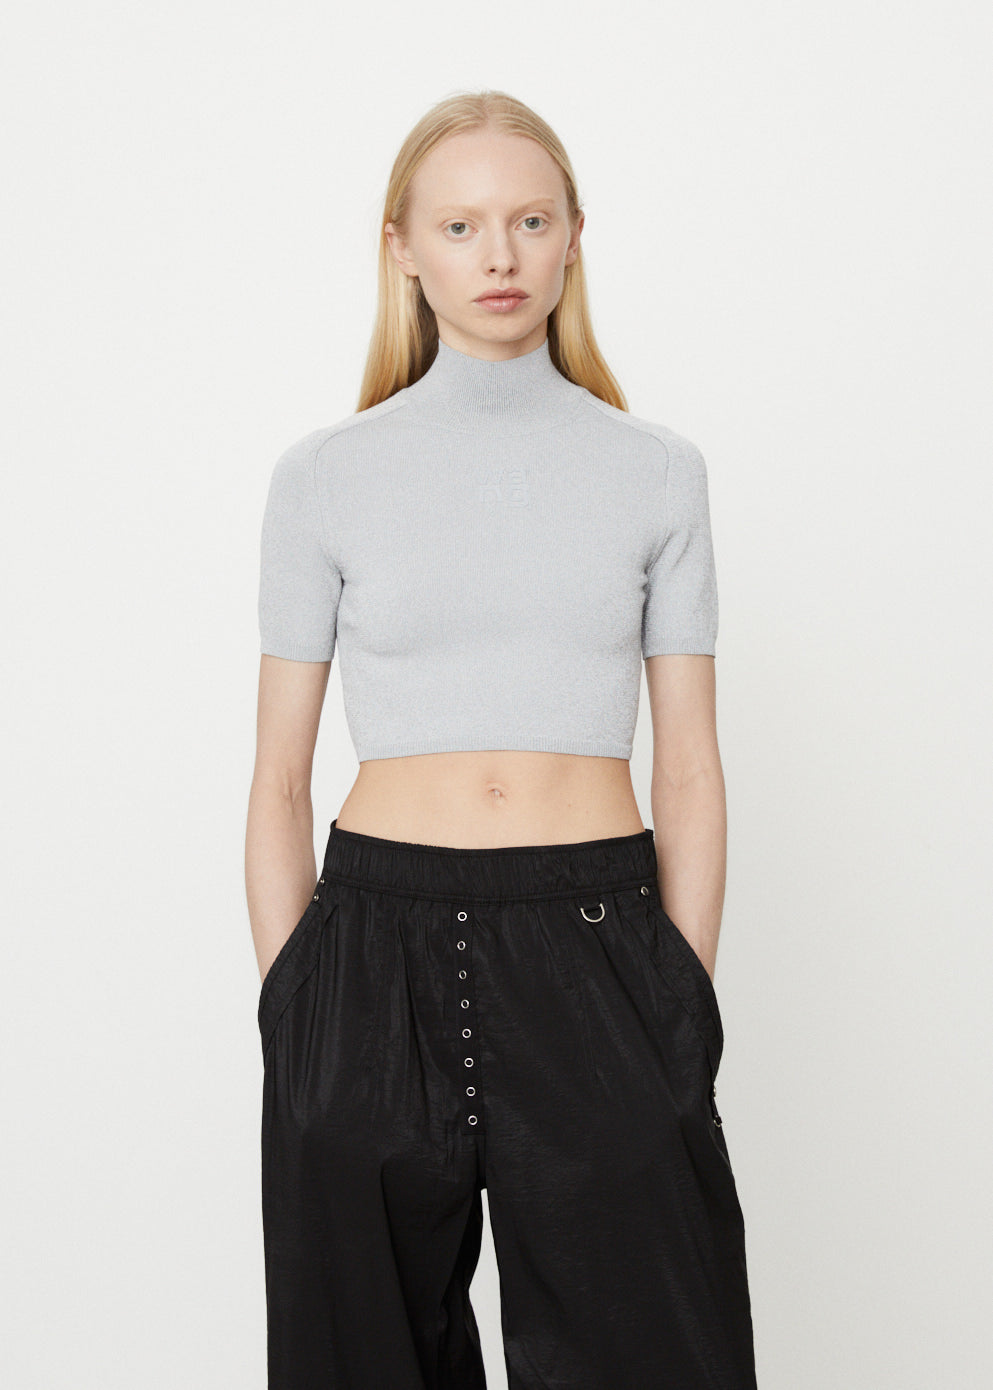 Cropped Pullover with Printed Reflective Logo